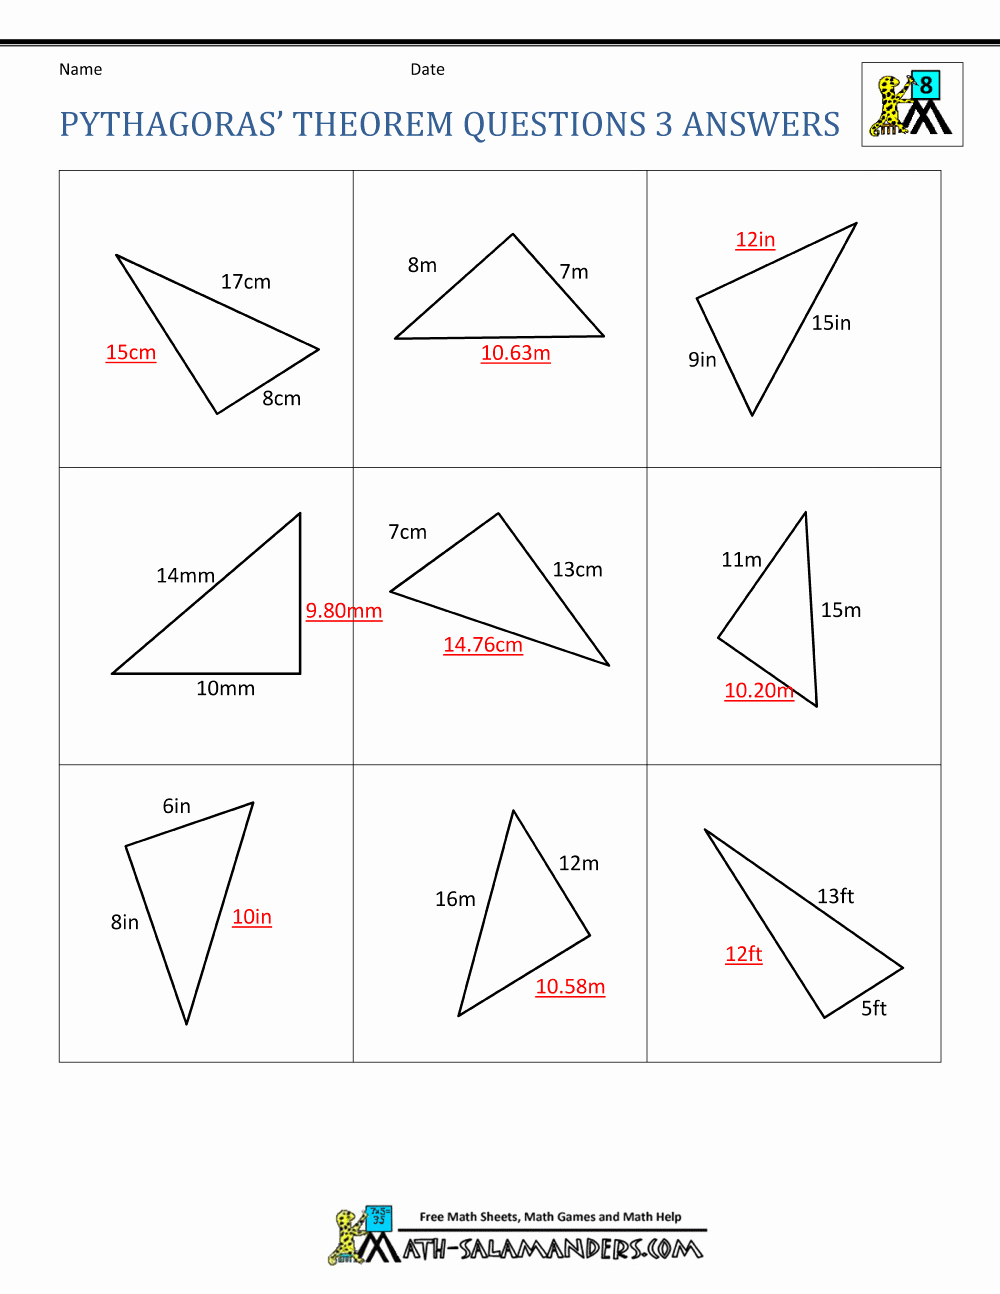 Pythagoras theorem Worksheet with Answers New Pythagoras theorem Questions